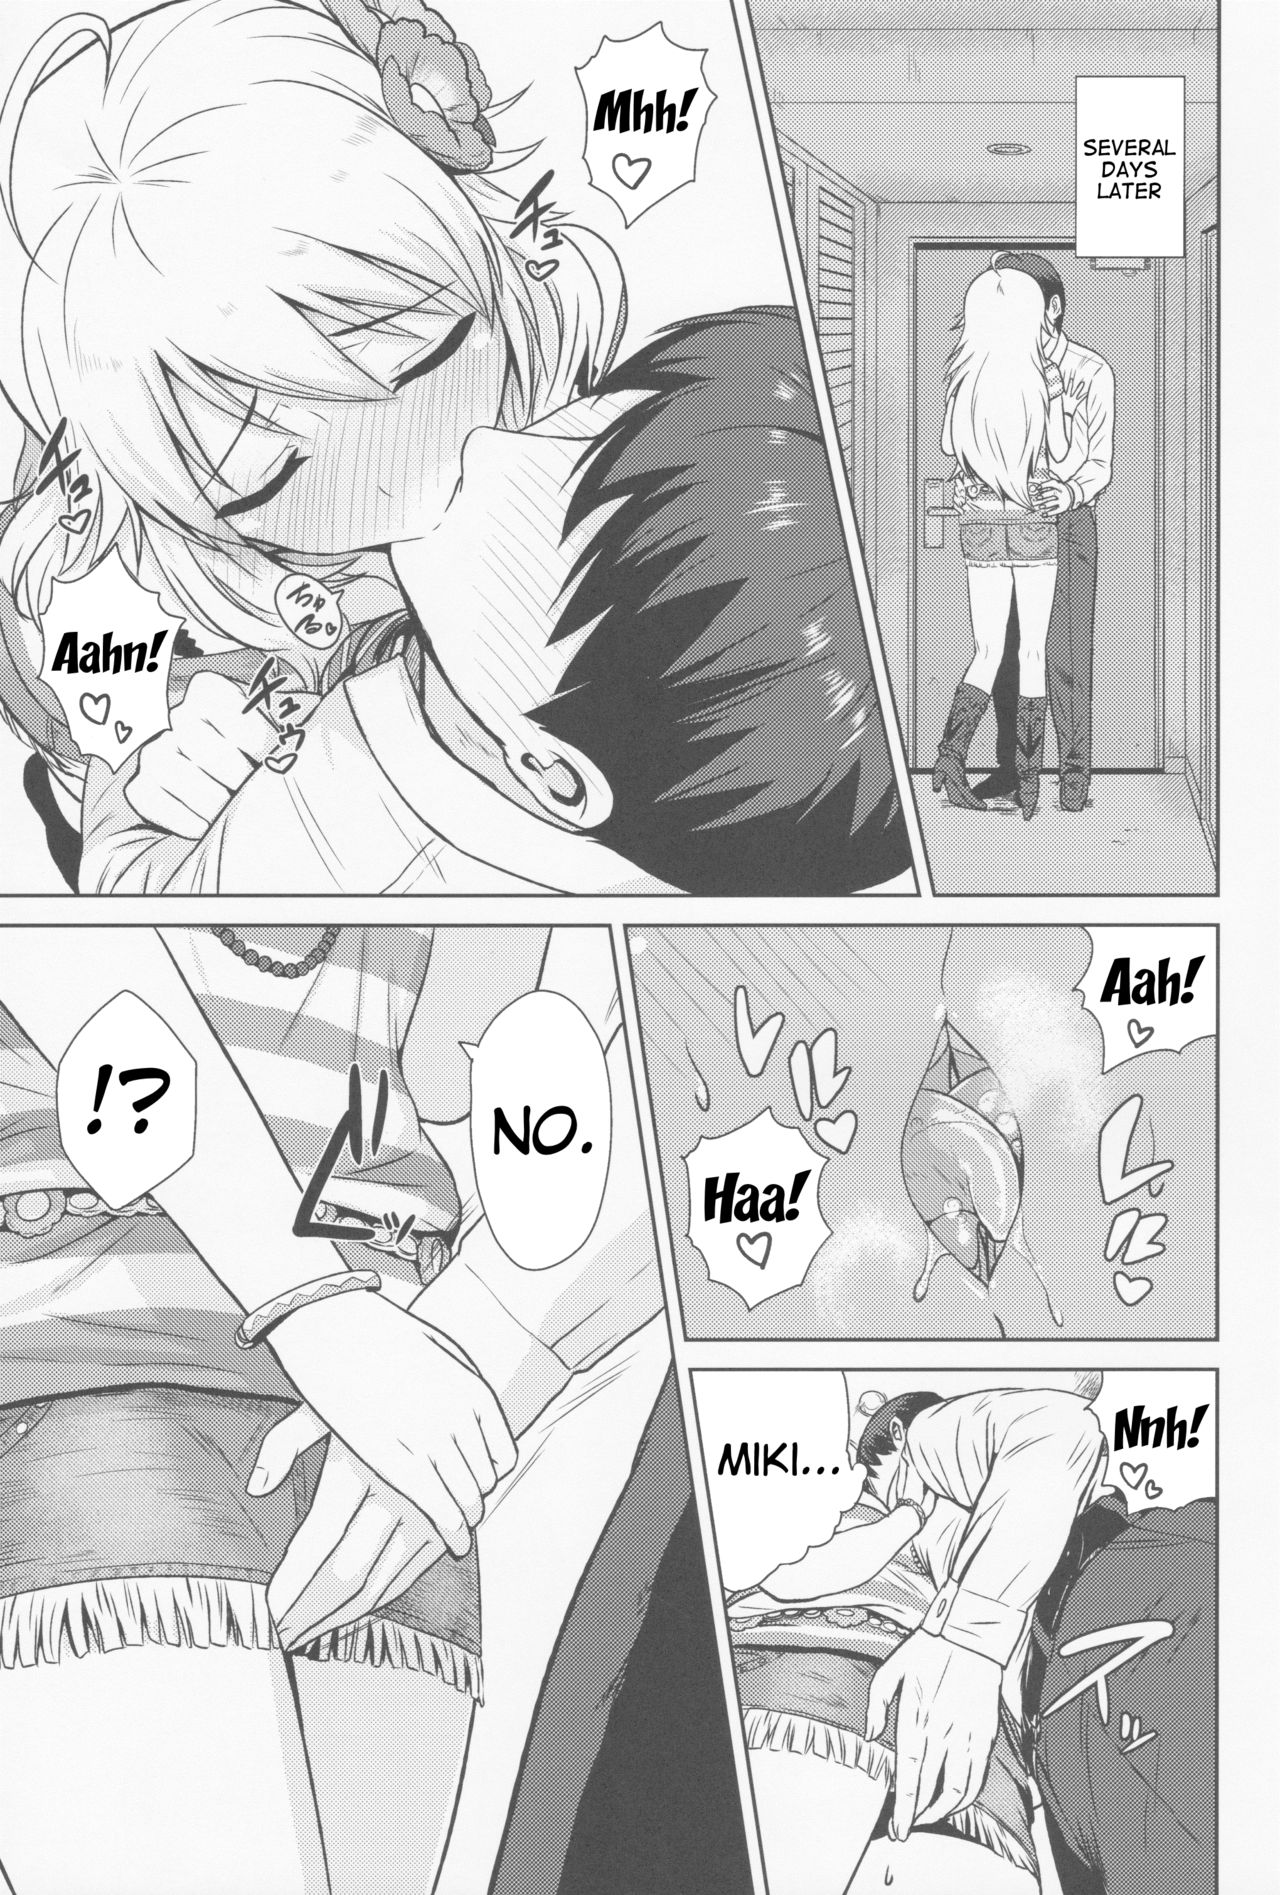 (MarionetteAngel2013) [PLANT (Tsurui)] Oshiete MY HONEY (THE IDOLM@STER) [English] {doujin-moe.us} page 8 full